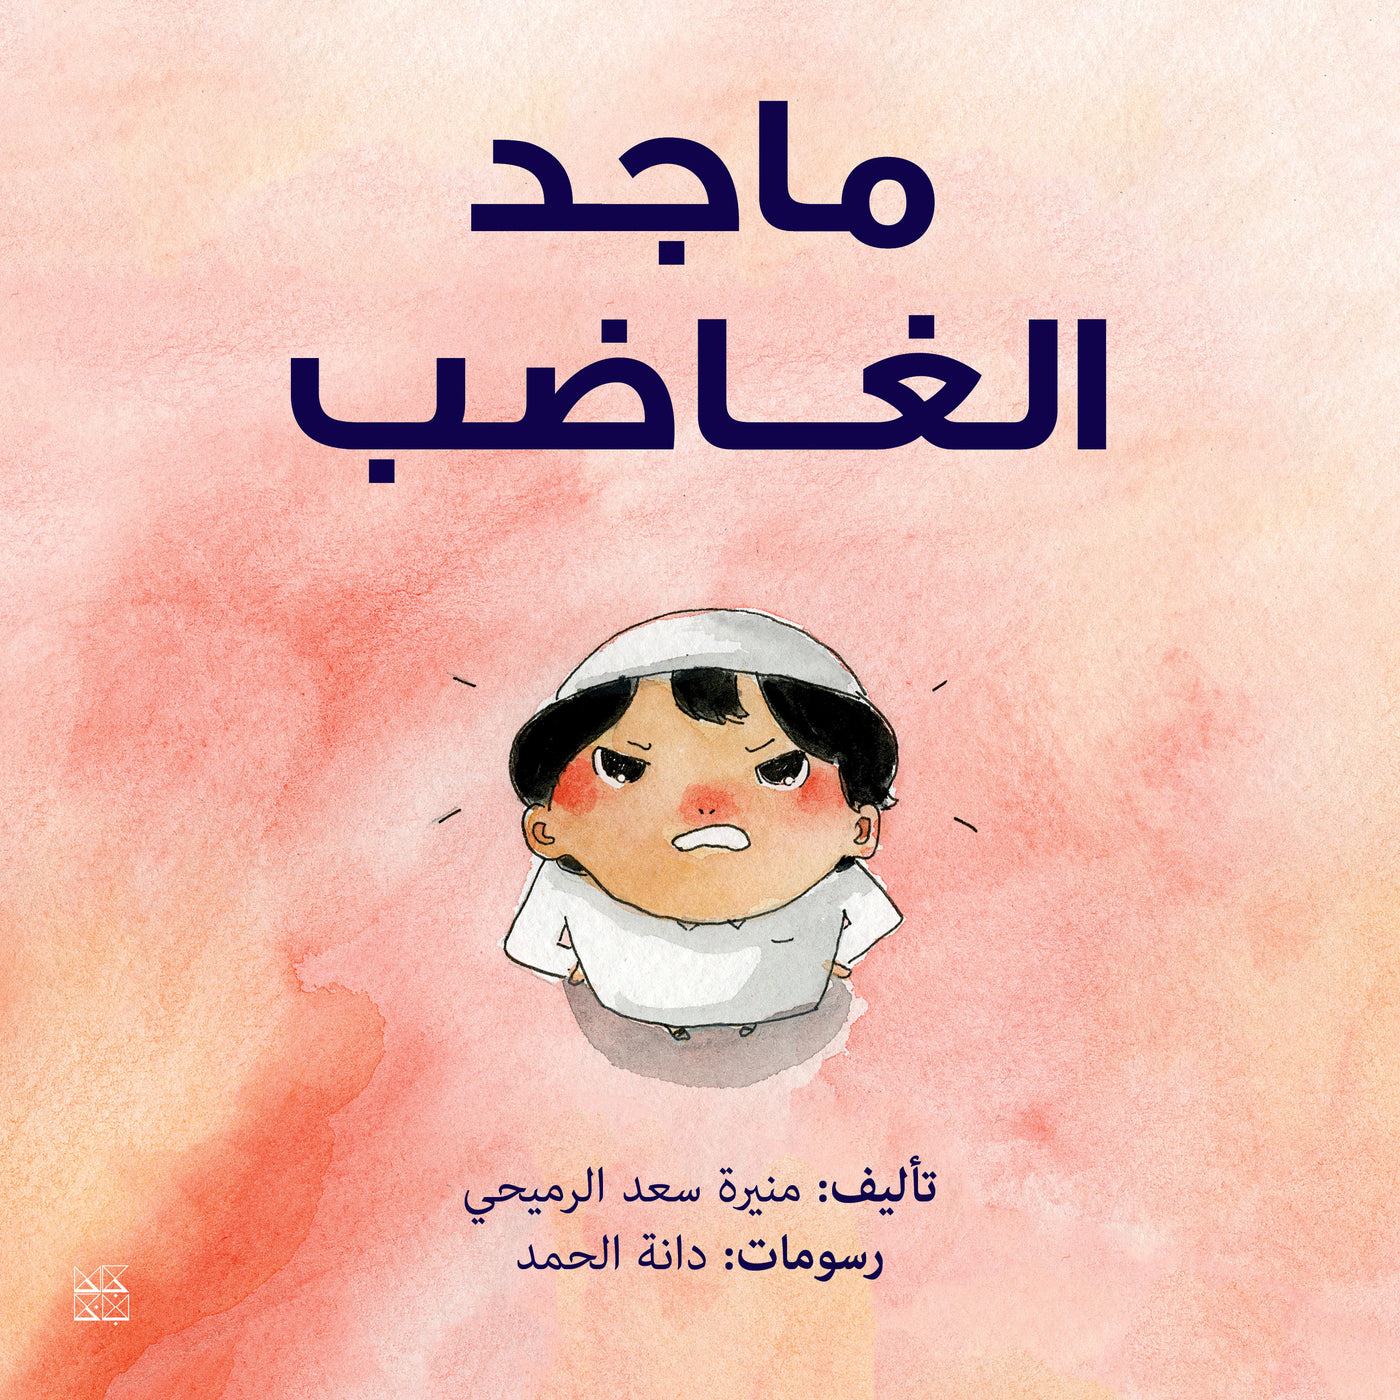 Angry Majid Book Cover